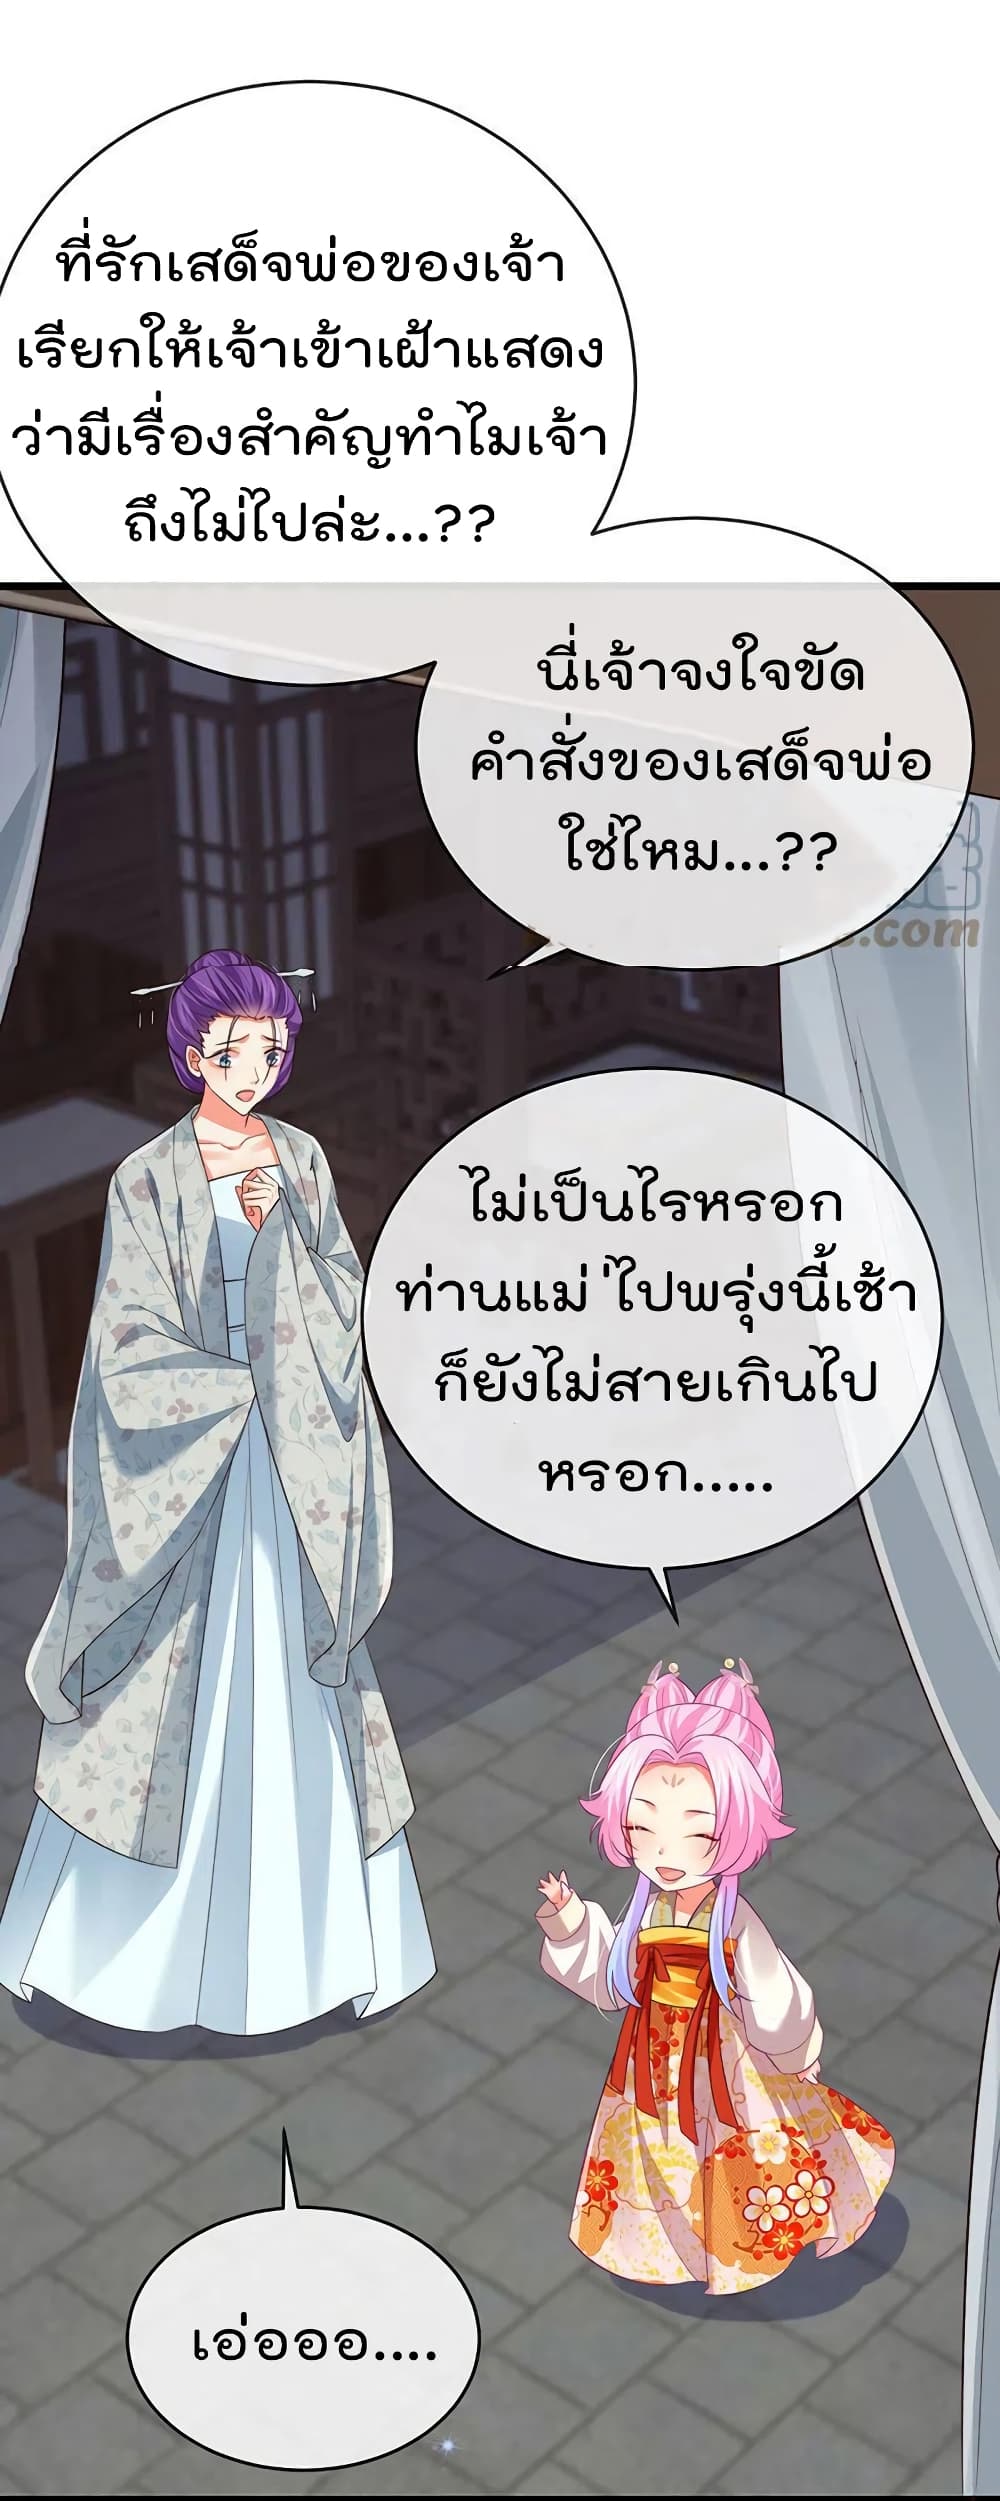 One Hundred Ways to Abuse Scum ตอนที่ 57 (27)